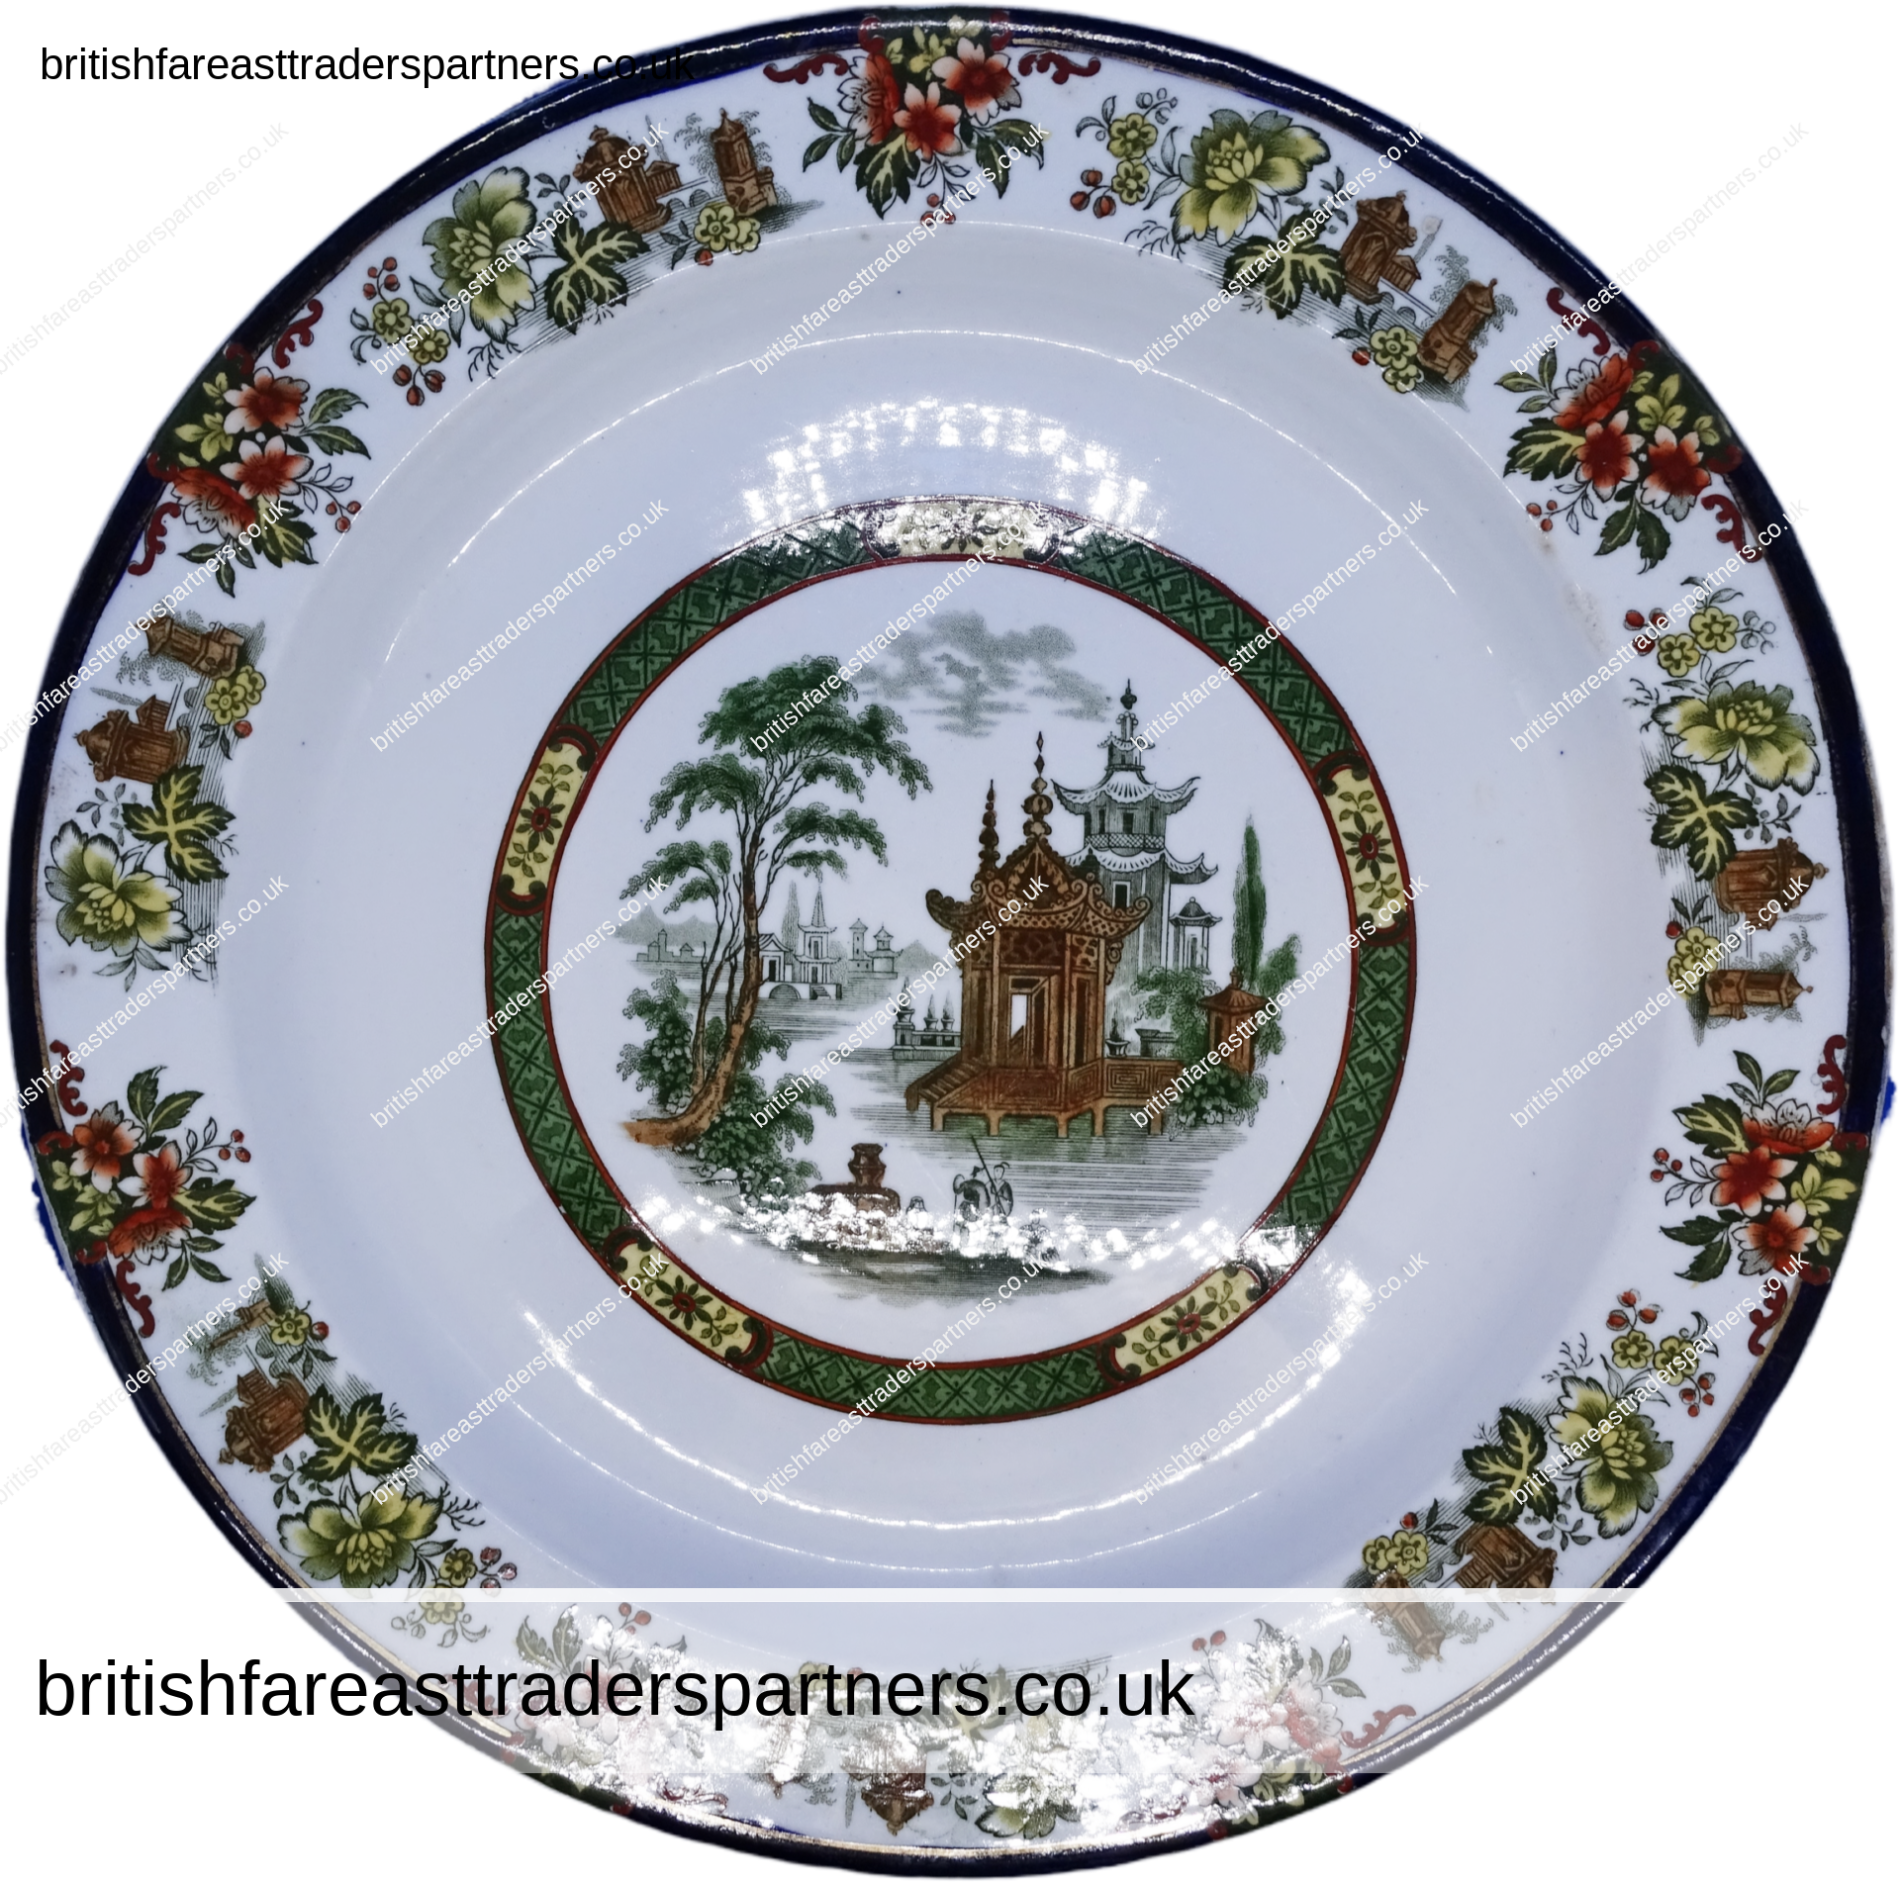 RARE ANTIQUE ROYAL DOULTON CHARGER BURSLEM ENGLAND “MADRAS” PLATE VINTAGE & ANTIQUES | COLLECTABLES |  TABLEWARE | SERVEWARE | HOMEWARE | KITCHENALIA  | ENGLISH EAST INDIA COMPANY (EEIC) | CHINESE MERCHANTS & TRADERS | INDIA |  ENGLISH / ENGLAND  | CERAMICS & PORCELAIN | LIFESTYLE | HERITAGE | HISTORY | CULTURE